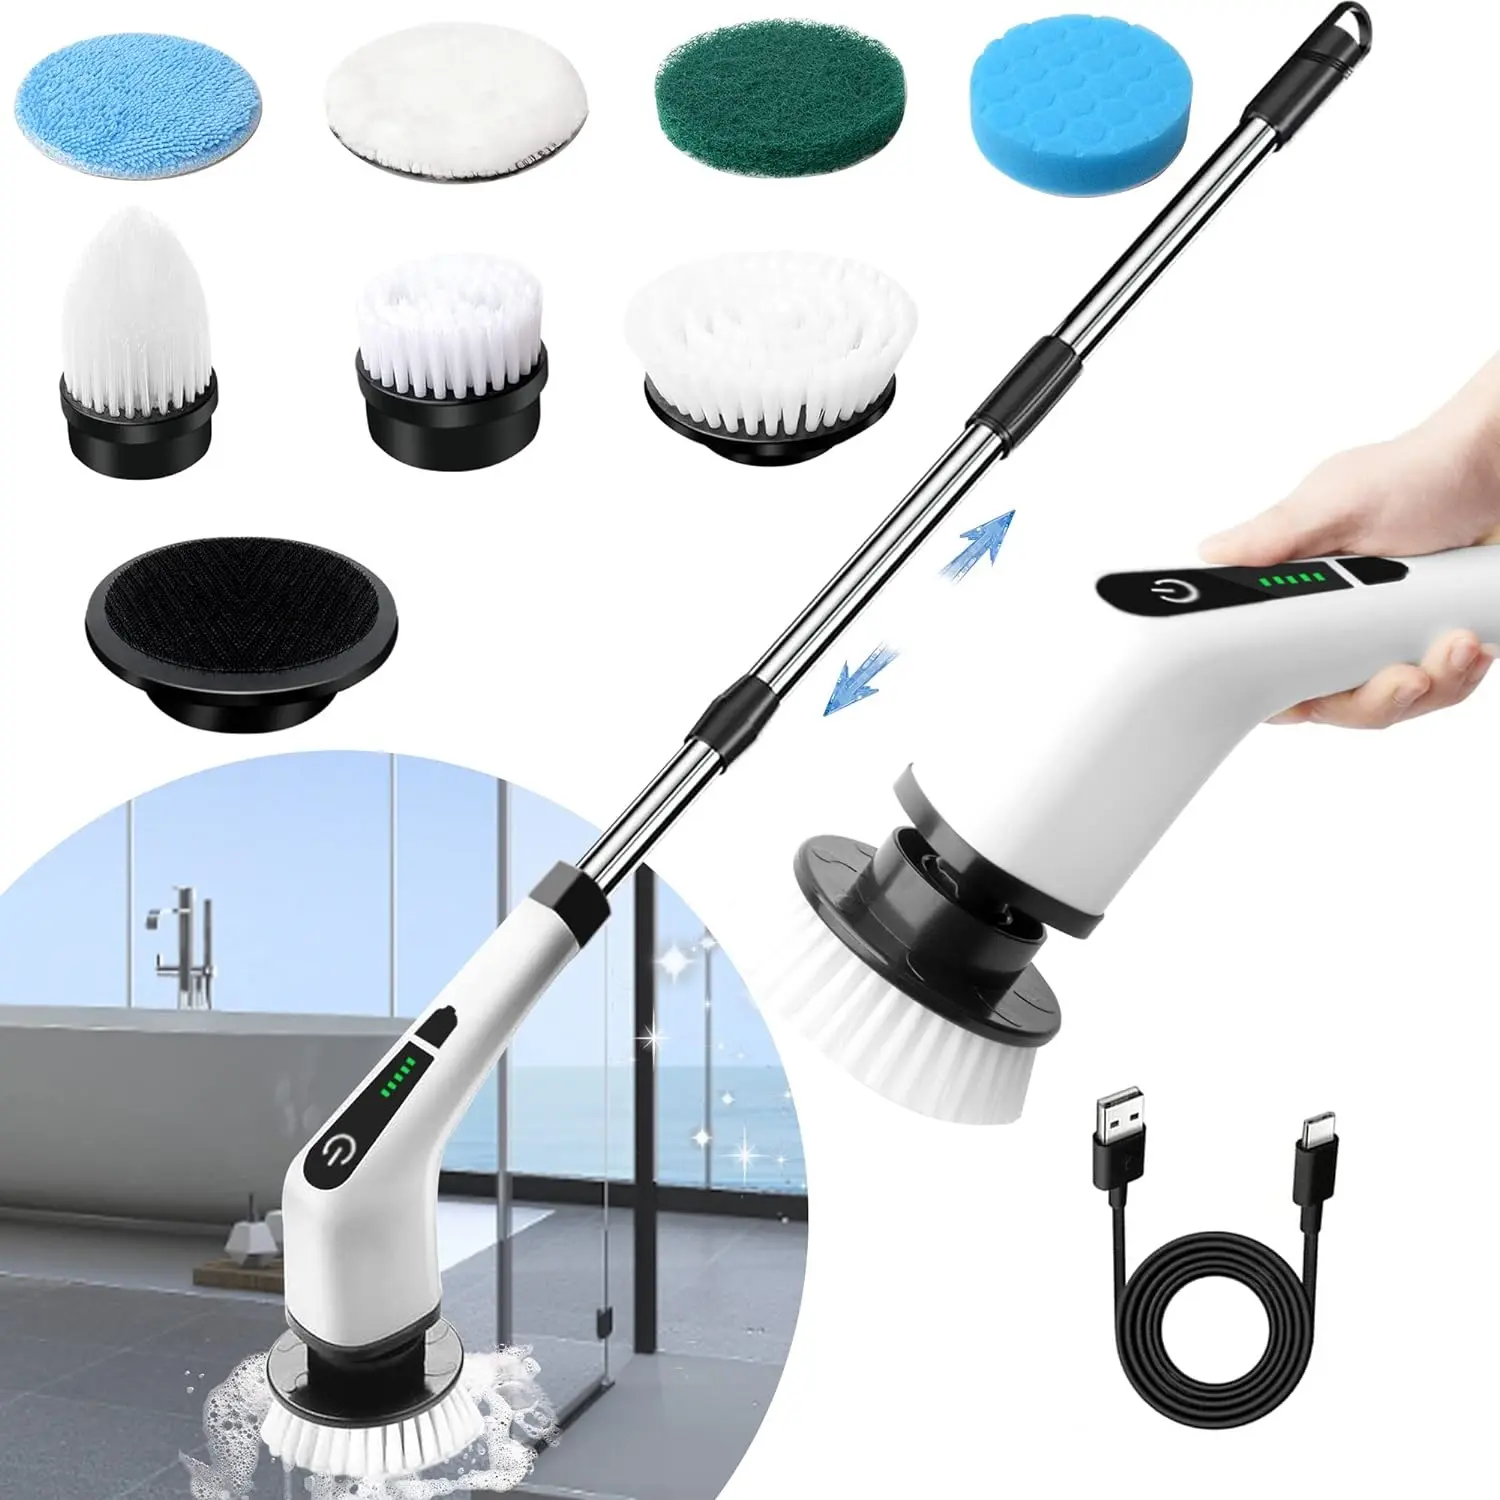 Popular Electric Spin Scrubber, Cordless Cleaning Brush, Tub and Floor Tile 360 Power Scrubber Dual Speed with Adjustable Handle